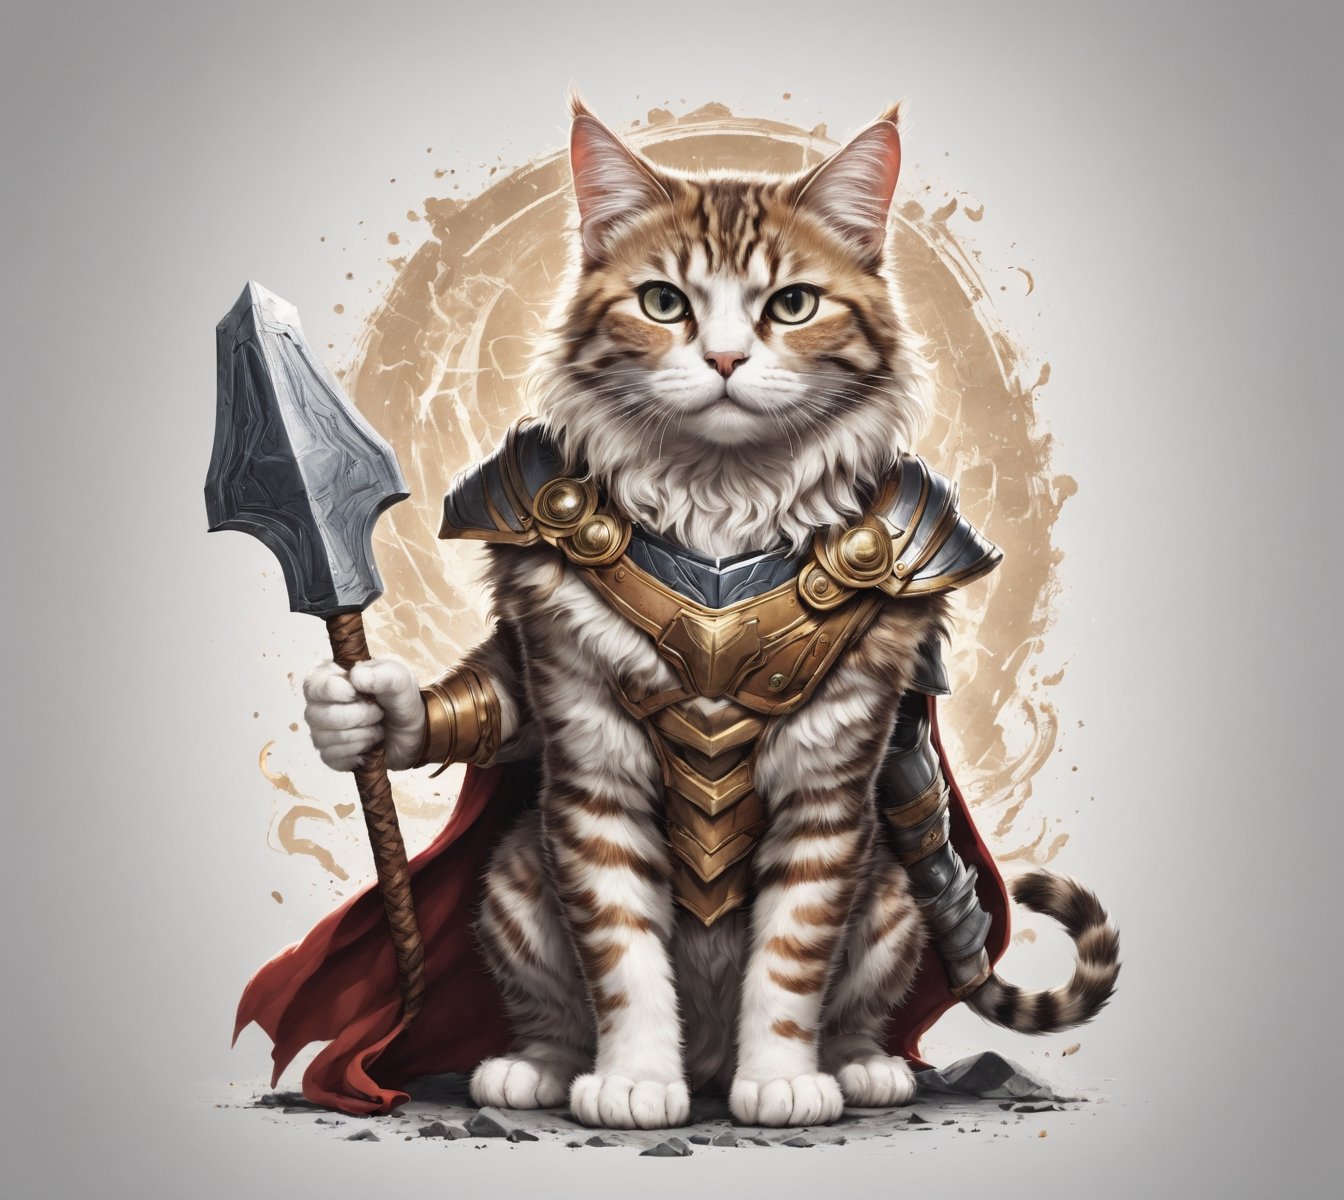  Cat Thor god of thunder, full view wide angle view, (centered on a white background), T-shirt design illustration, photo r3al, T-shirt design illustration, on a white background, more detail XL, Leonardo style 